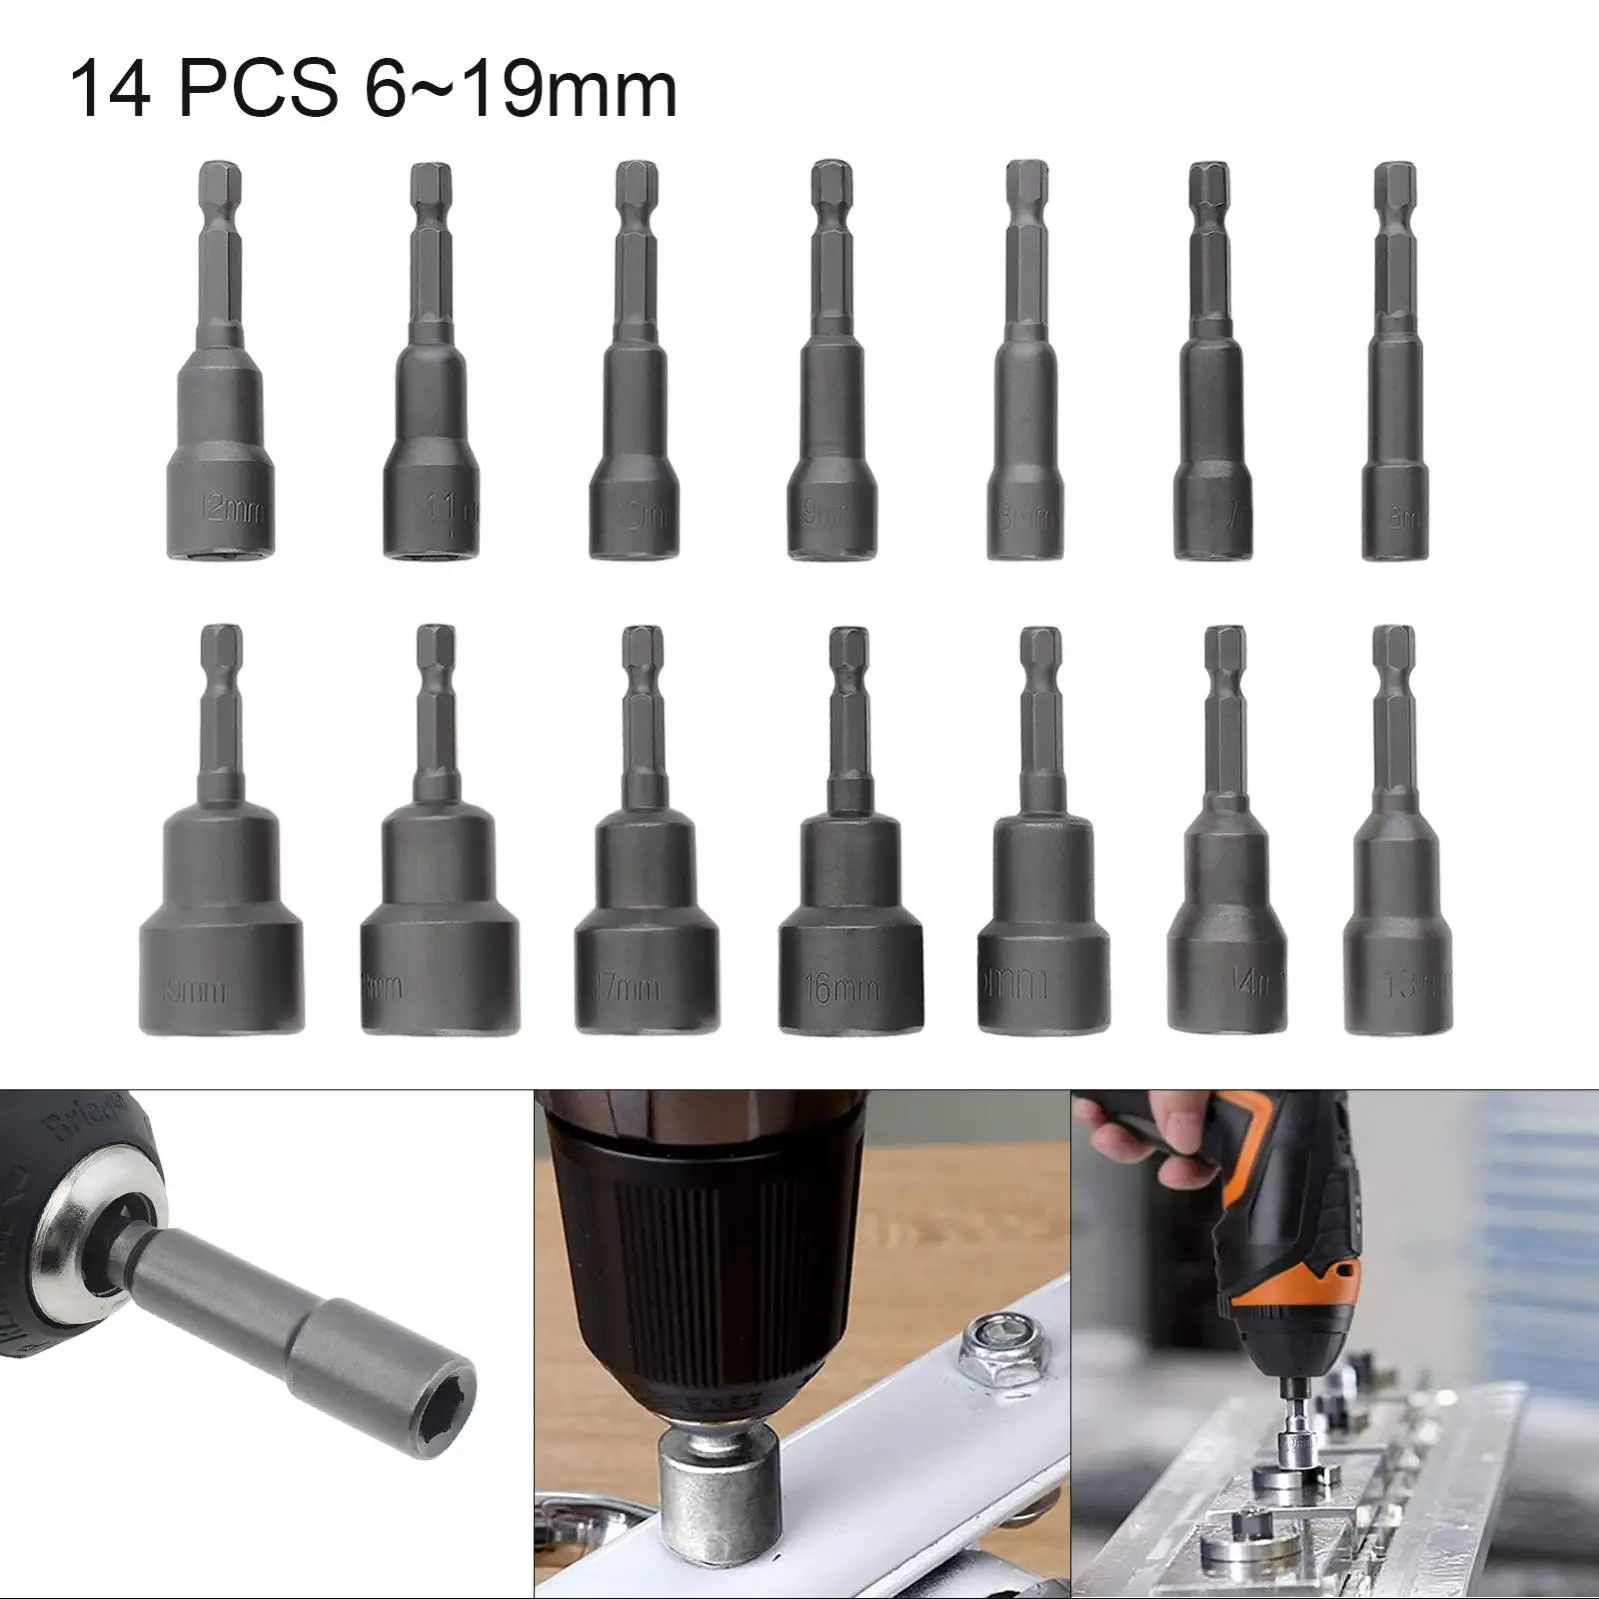 

14pcs Magnetic Hexagon Sockets 6-19mm 1/4Inch Hex Shank Nut Setter Driver Drill Bits Set Remover Tool for Electric Screwdriver